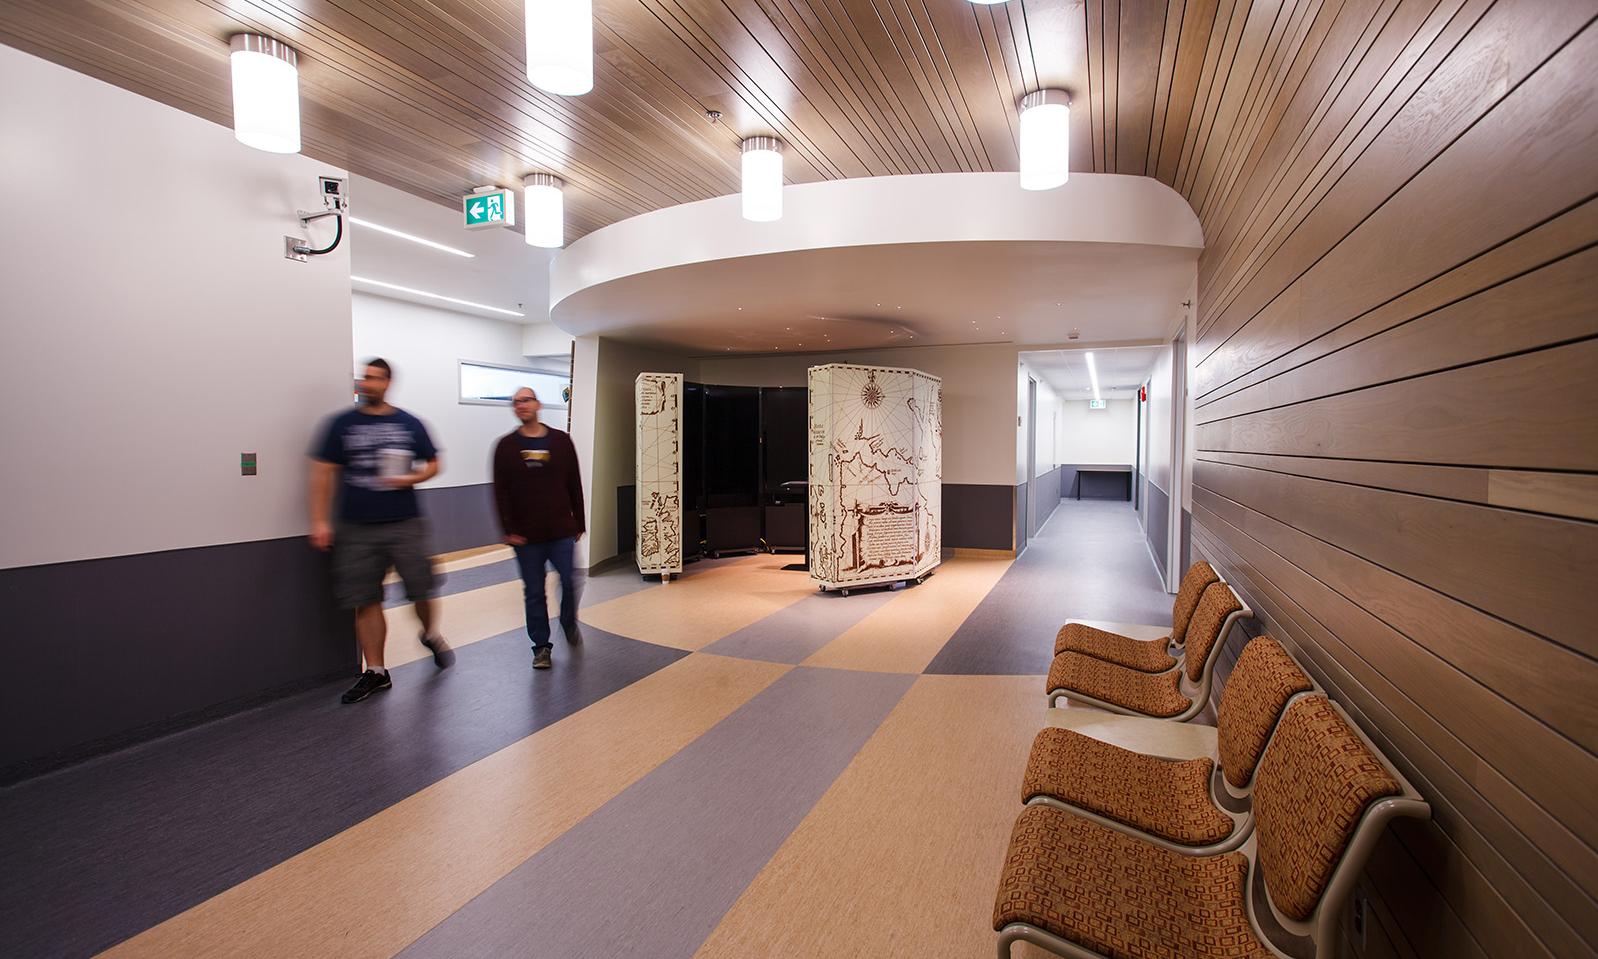 University of Manitoba, Wallace Building. Corridor opens into a central area inlaid with broad bands of purple-grey and pale blonde flooring. 